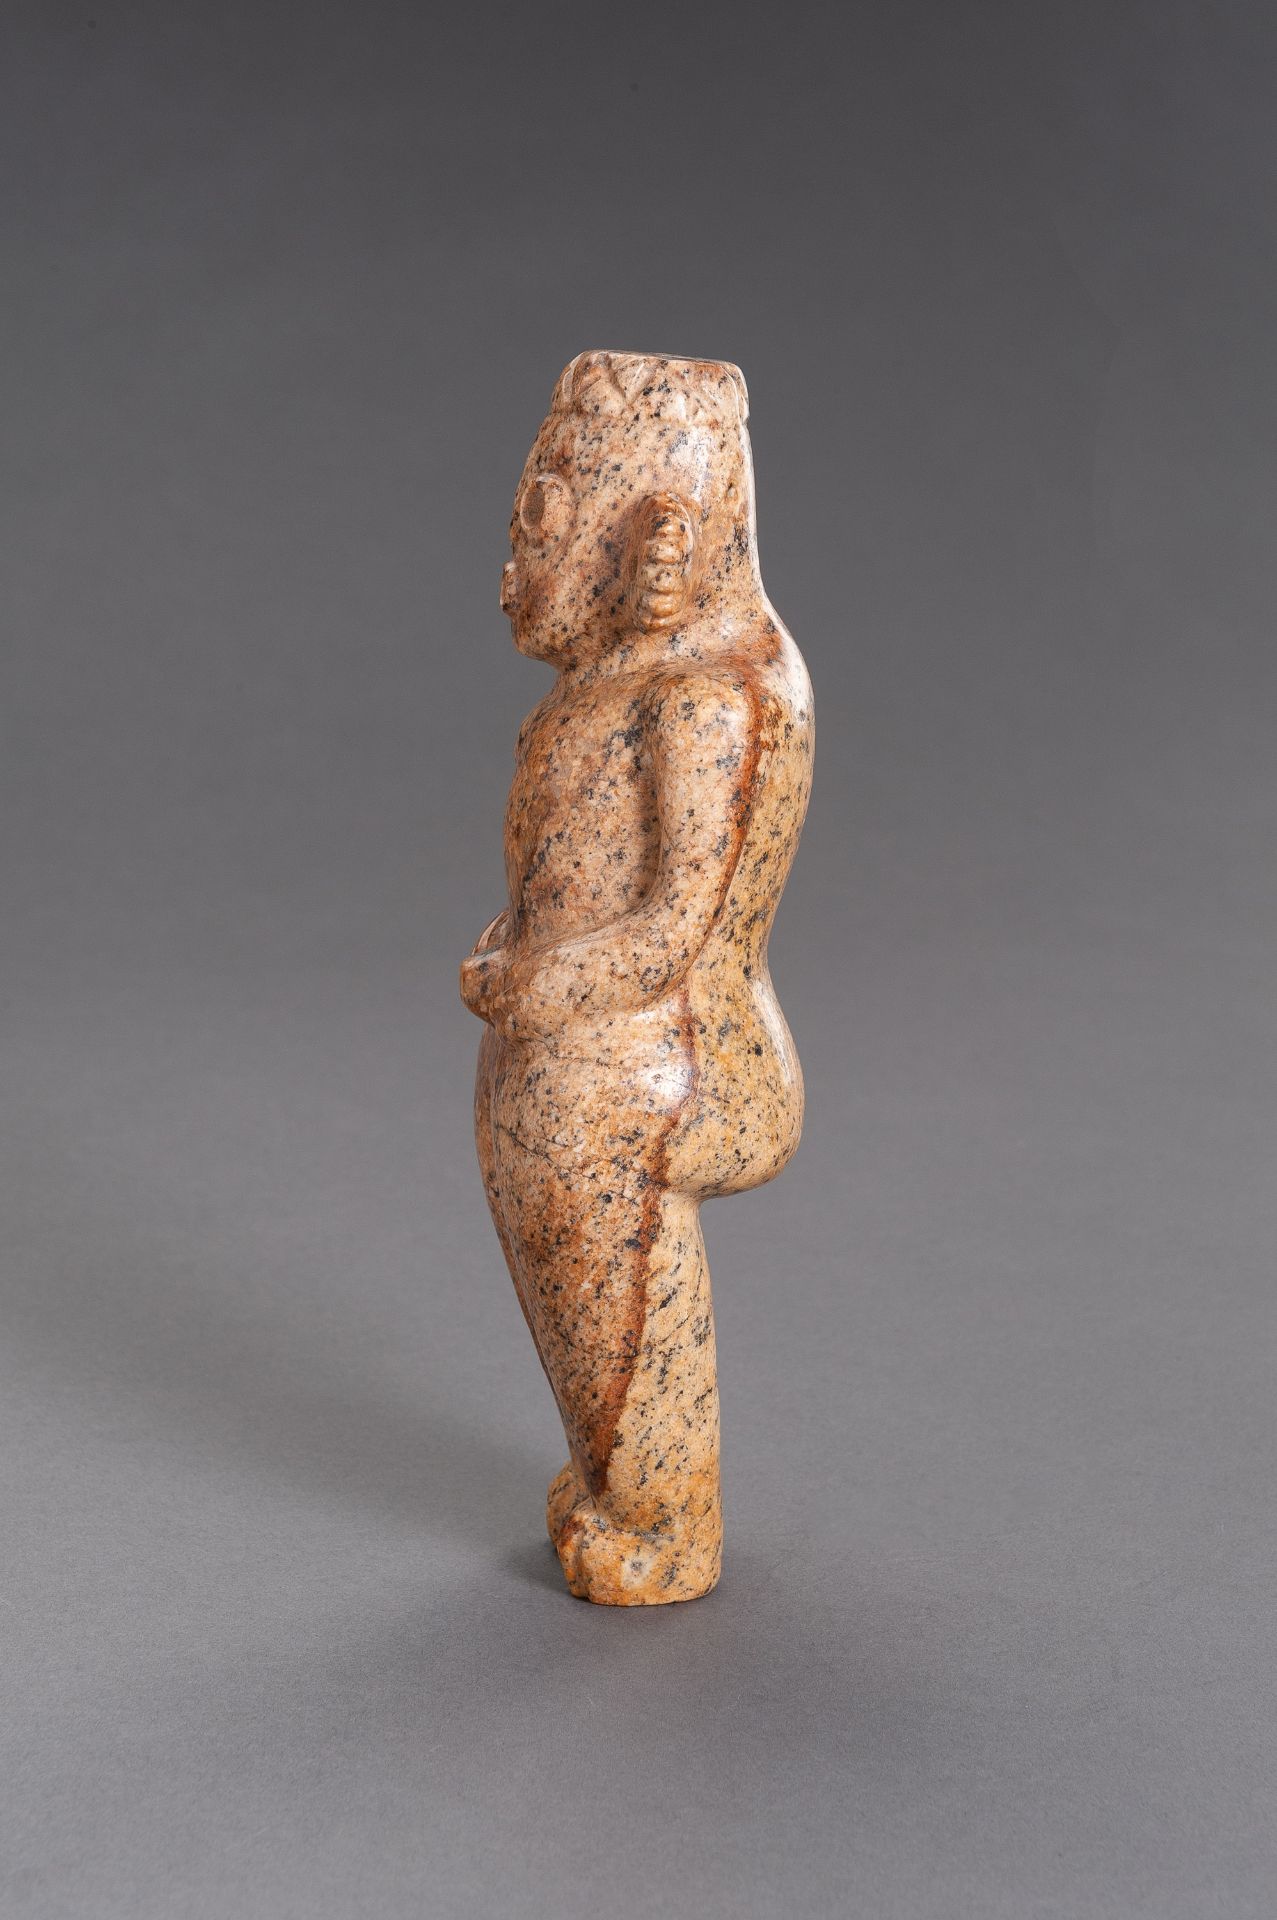 A STONE INDUS VALLEY STYLE FIGURE OF A MAN - Image 3 of 8